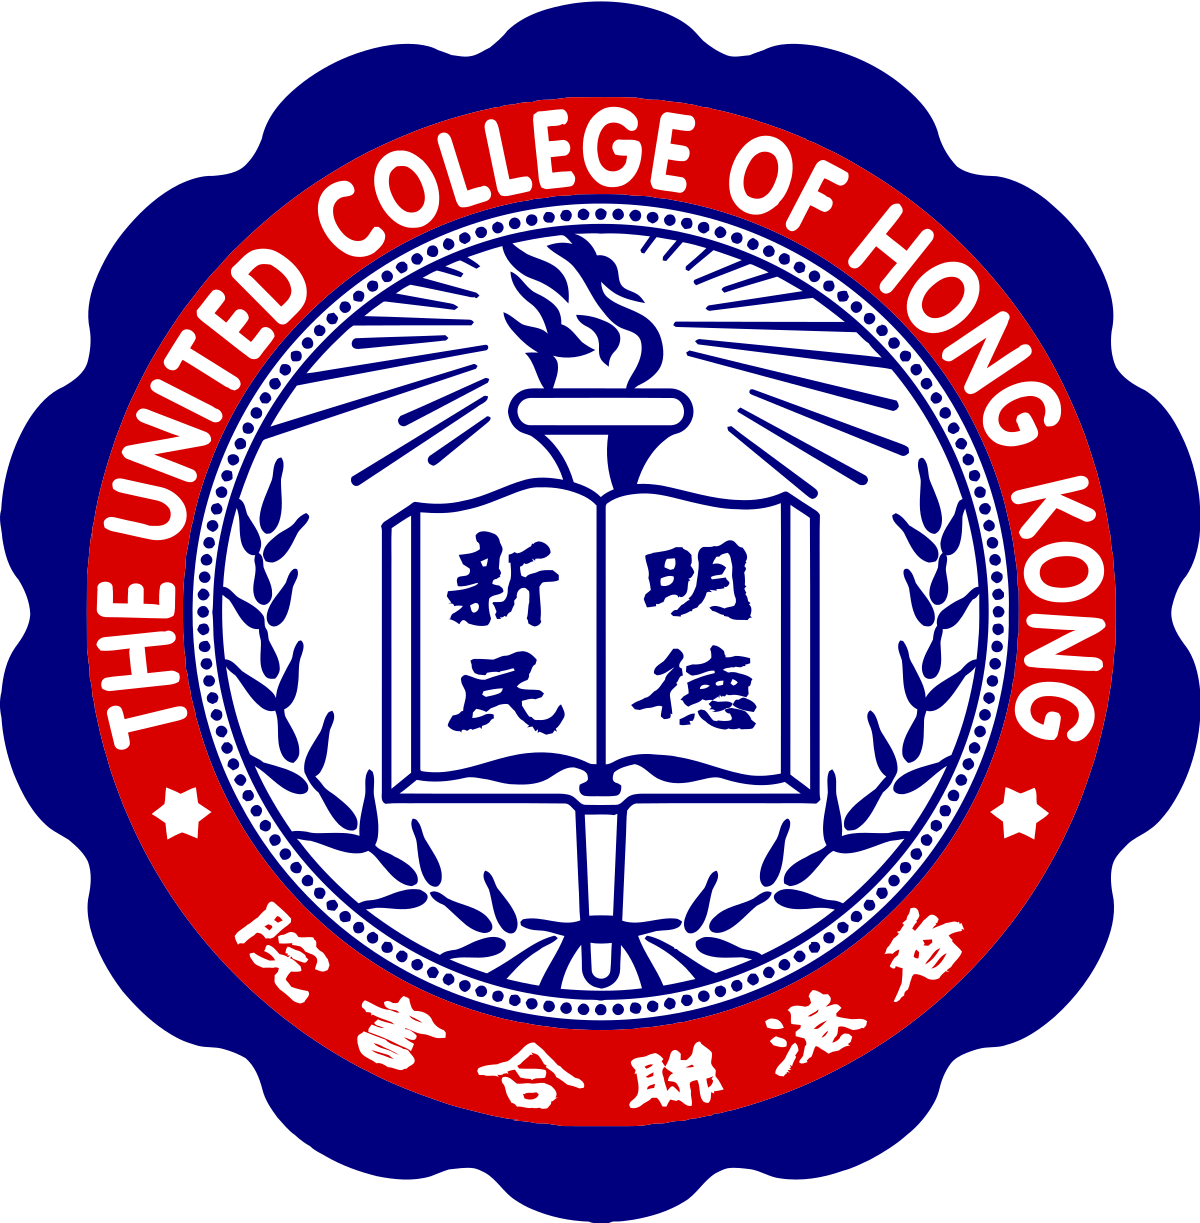 The United College of Hong Kong, CUHK